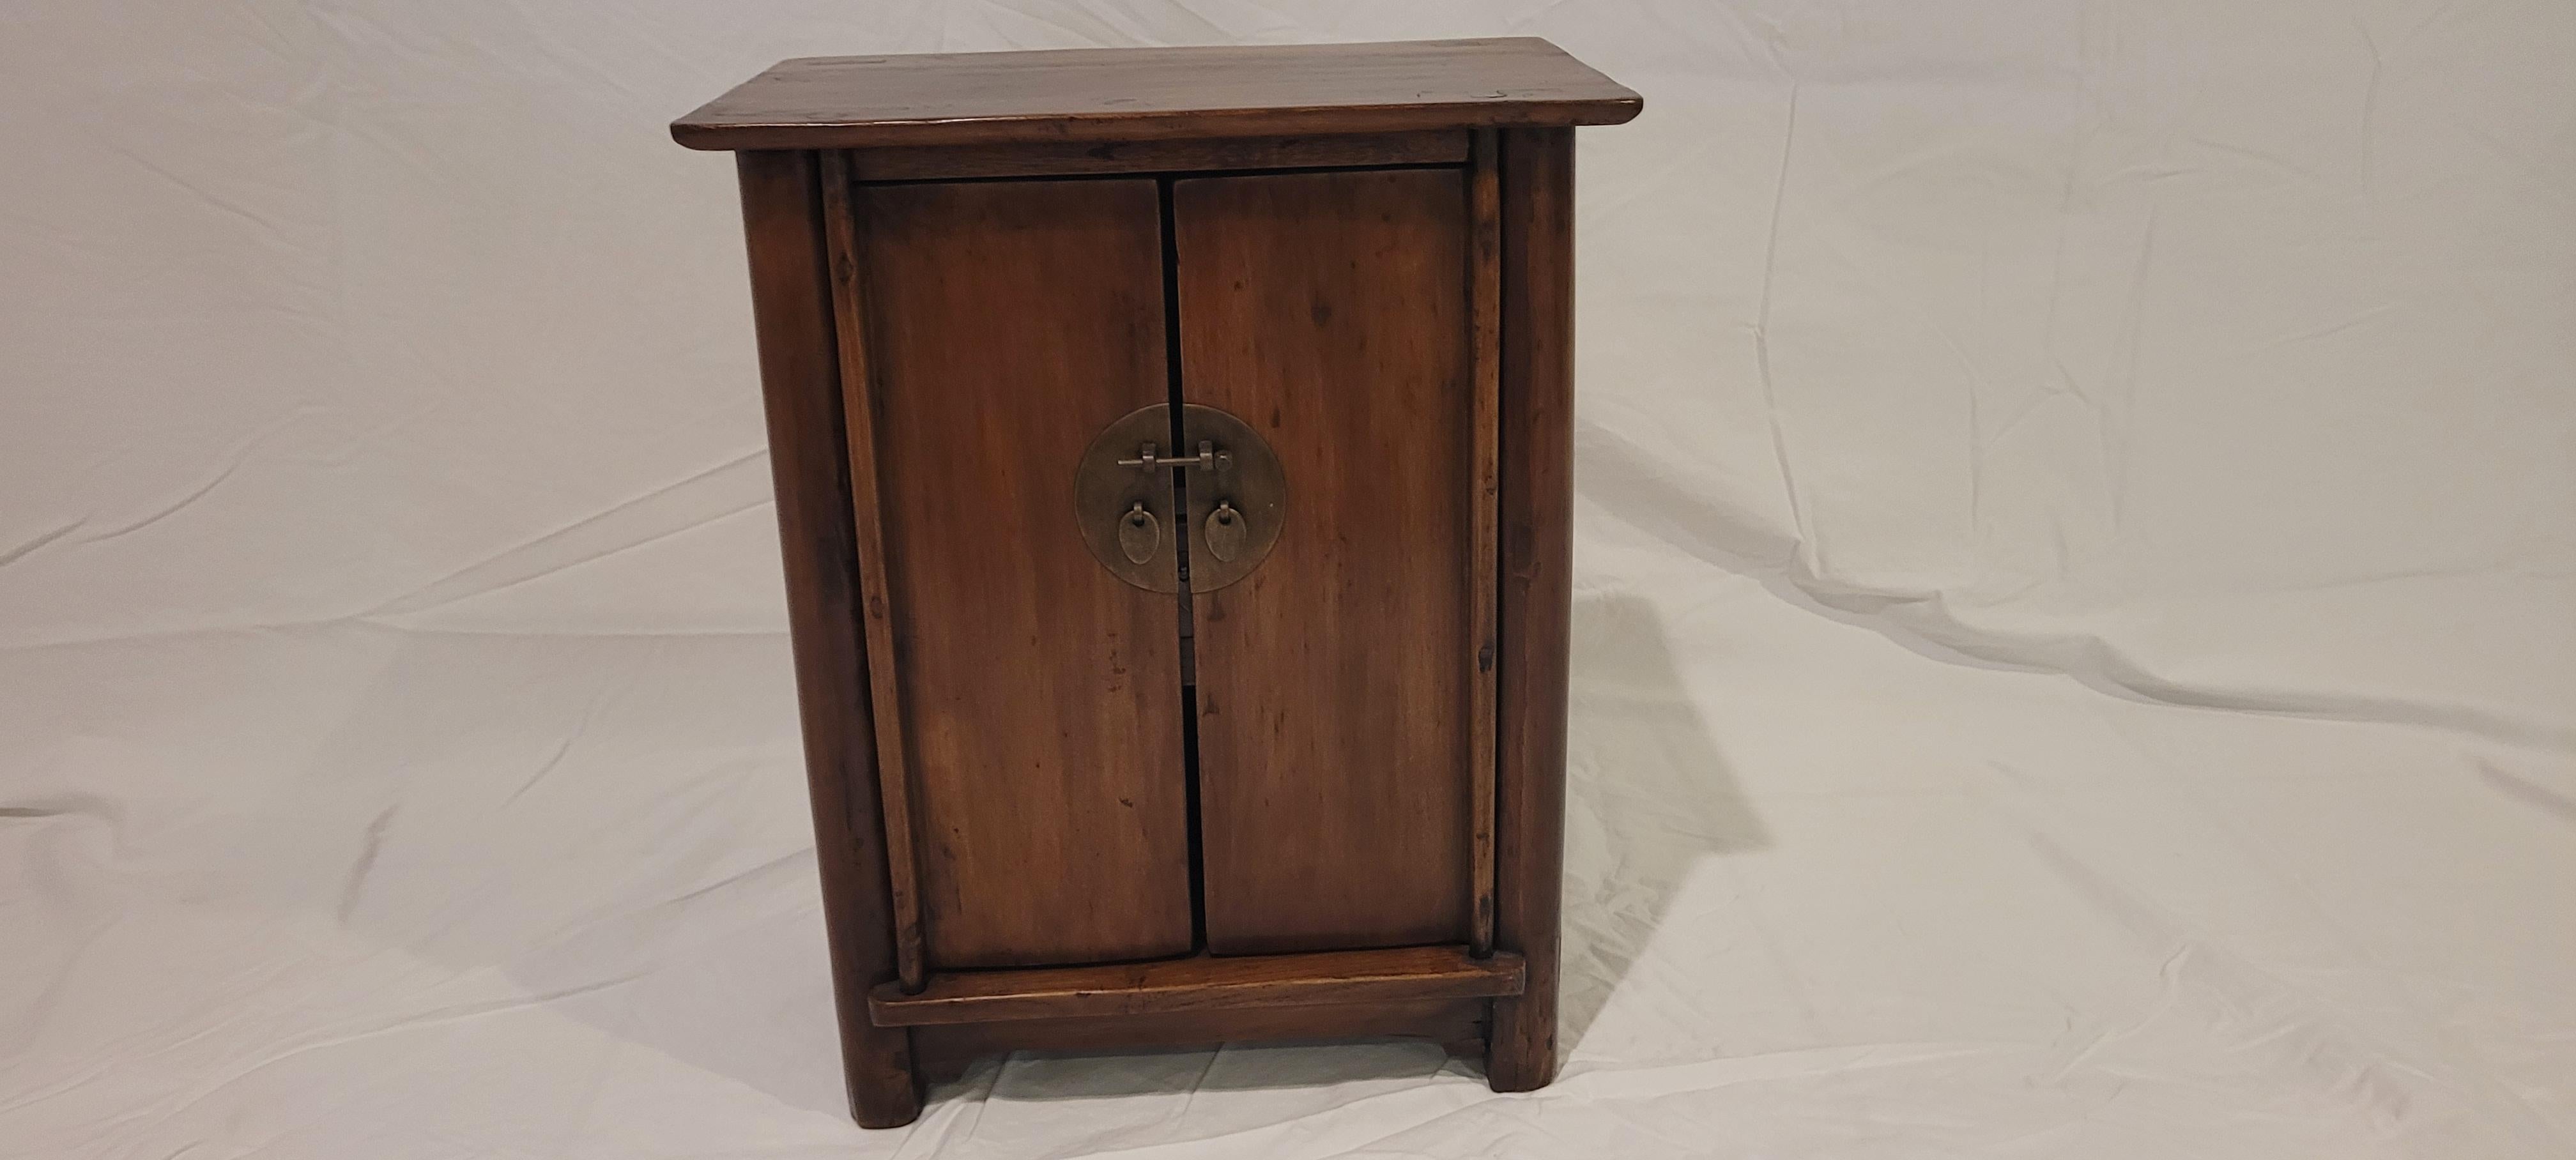 Small Kang Cabinet	18.5h x 14.75w x 10d
This small Kang cabinet has a flush top which slightly hangs over the body frame.  The frame members are round and the front is decorated with a round metal plate.  The apron is simple without any